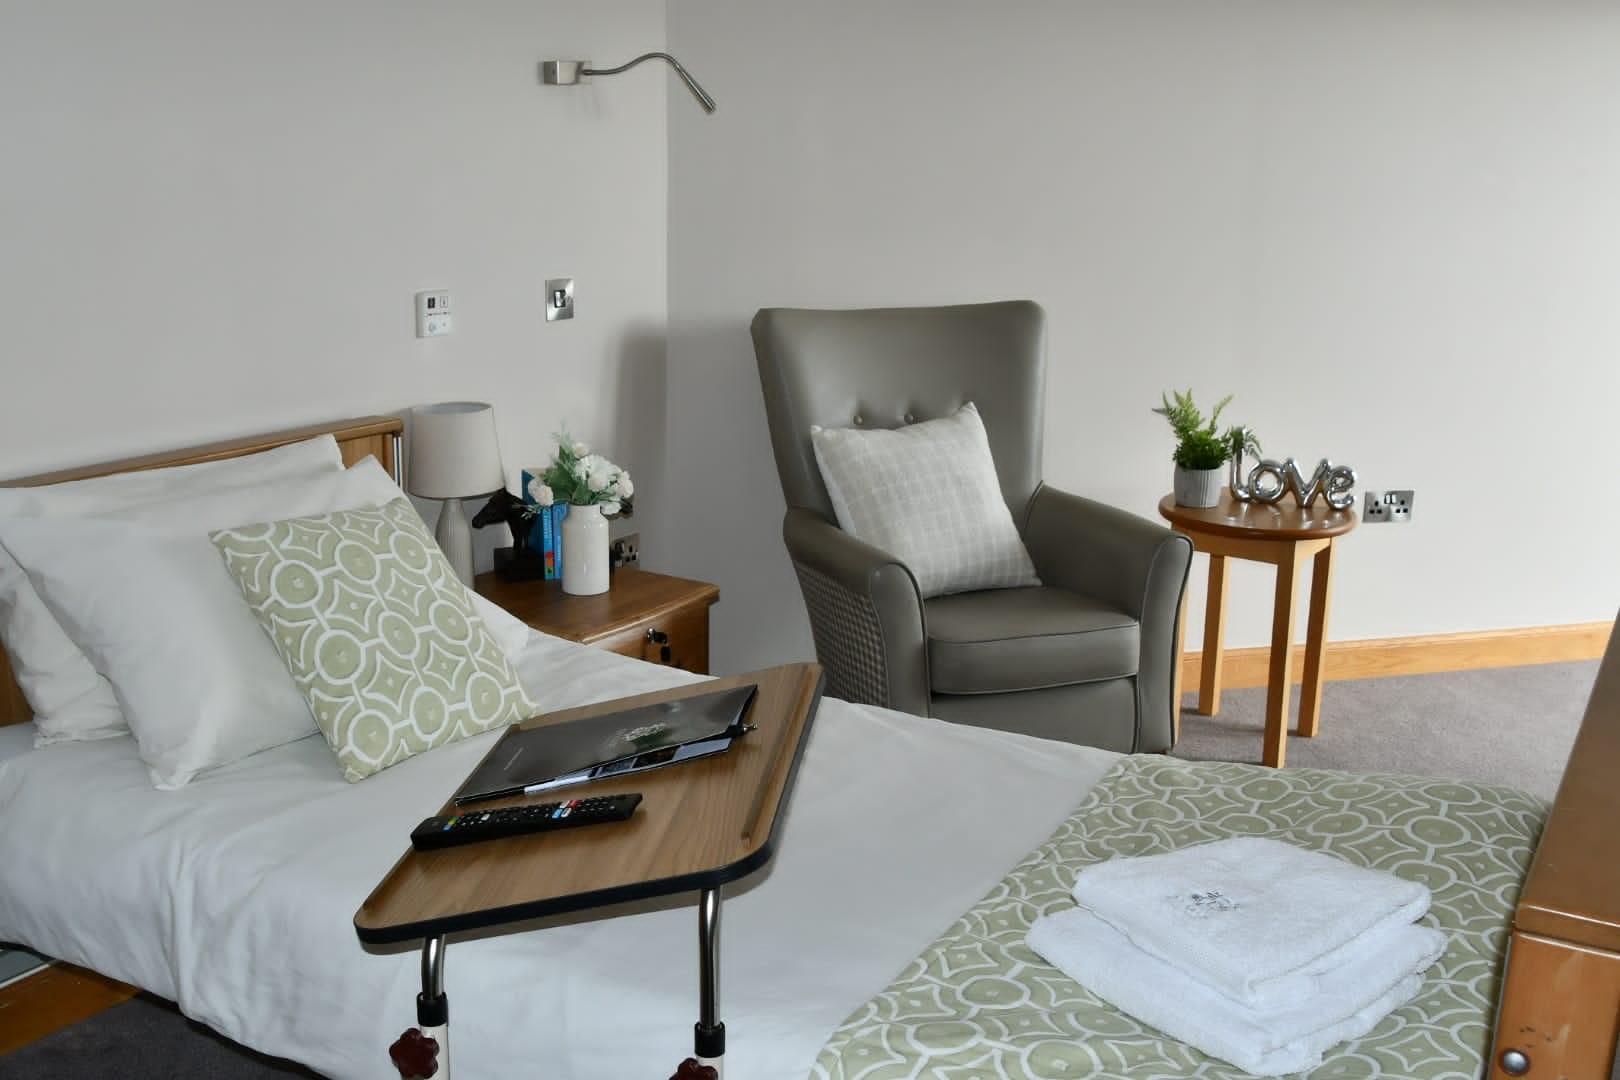 Assisted Living Suite at Deeside Care Home